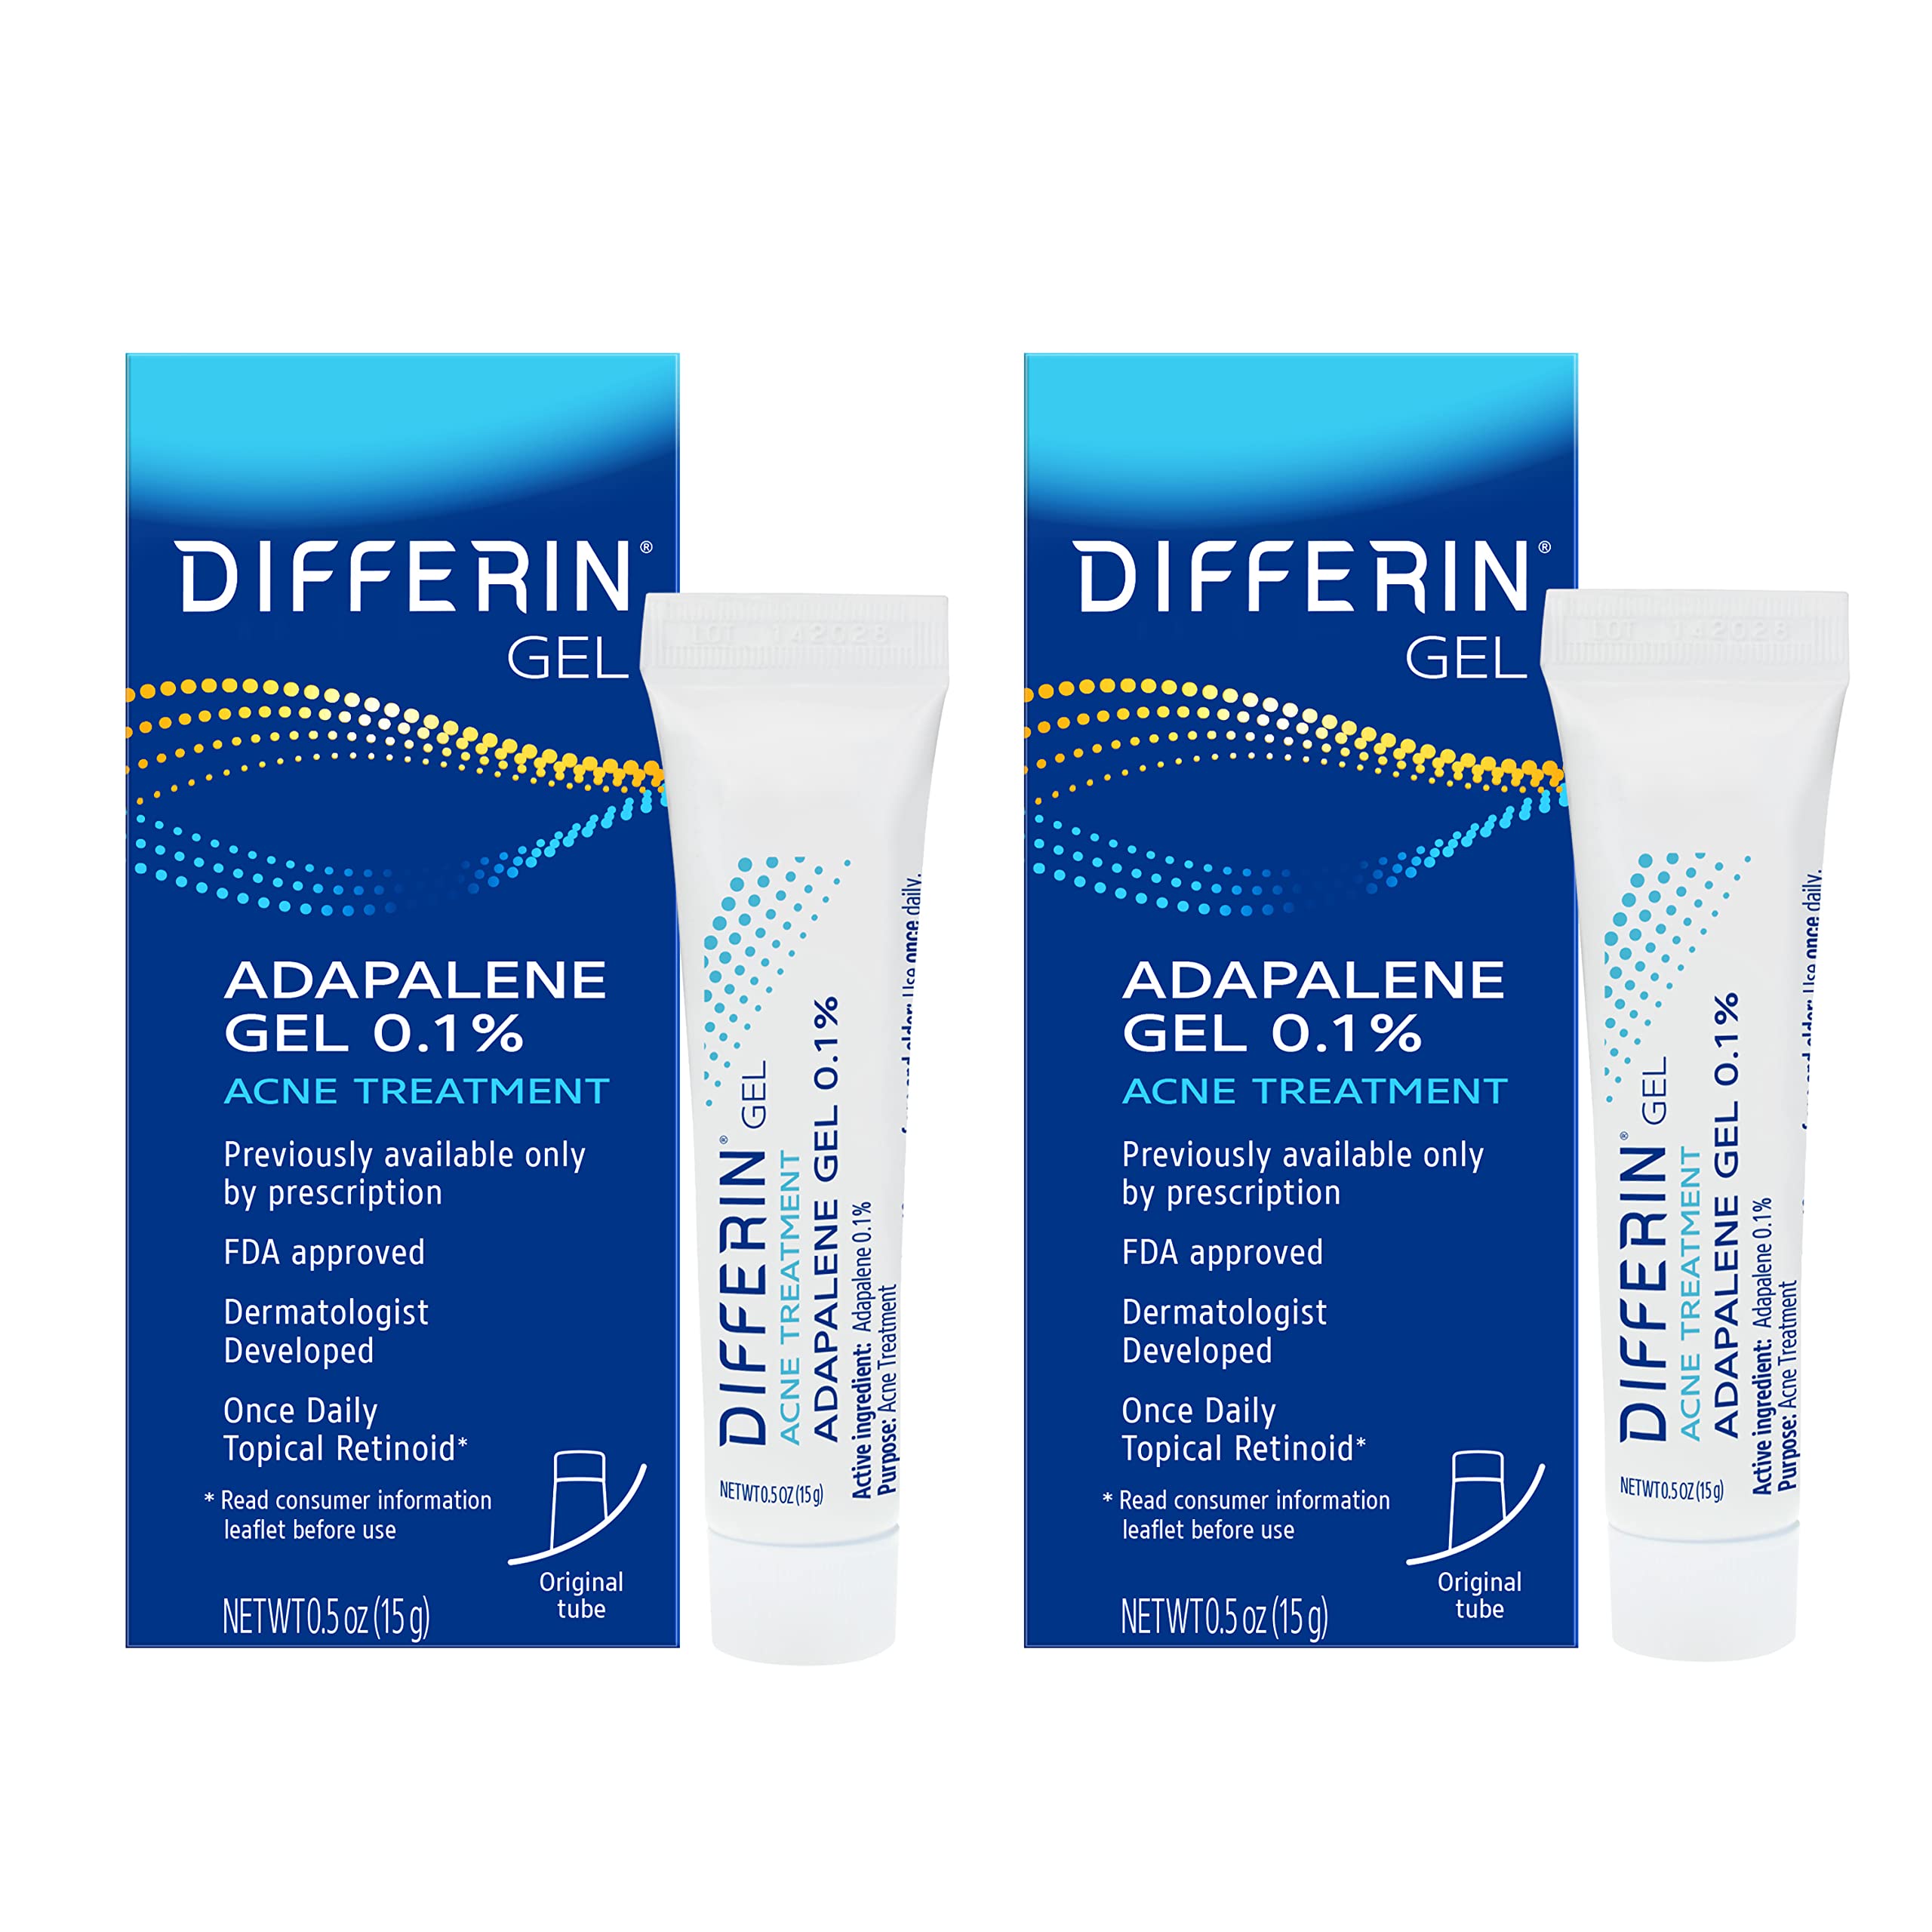 Differin Acne Treatment Gel, 60 Day Supply, Retinoid Treatment for Face with 0.1% Adapalene, Gentle Skin Care for Acne Prone Sensitive Skin, 15g Tube (Pack of 2) (Packaging May Vary)